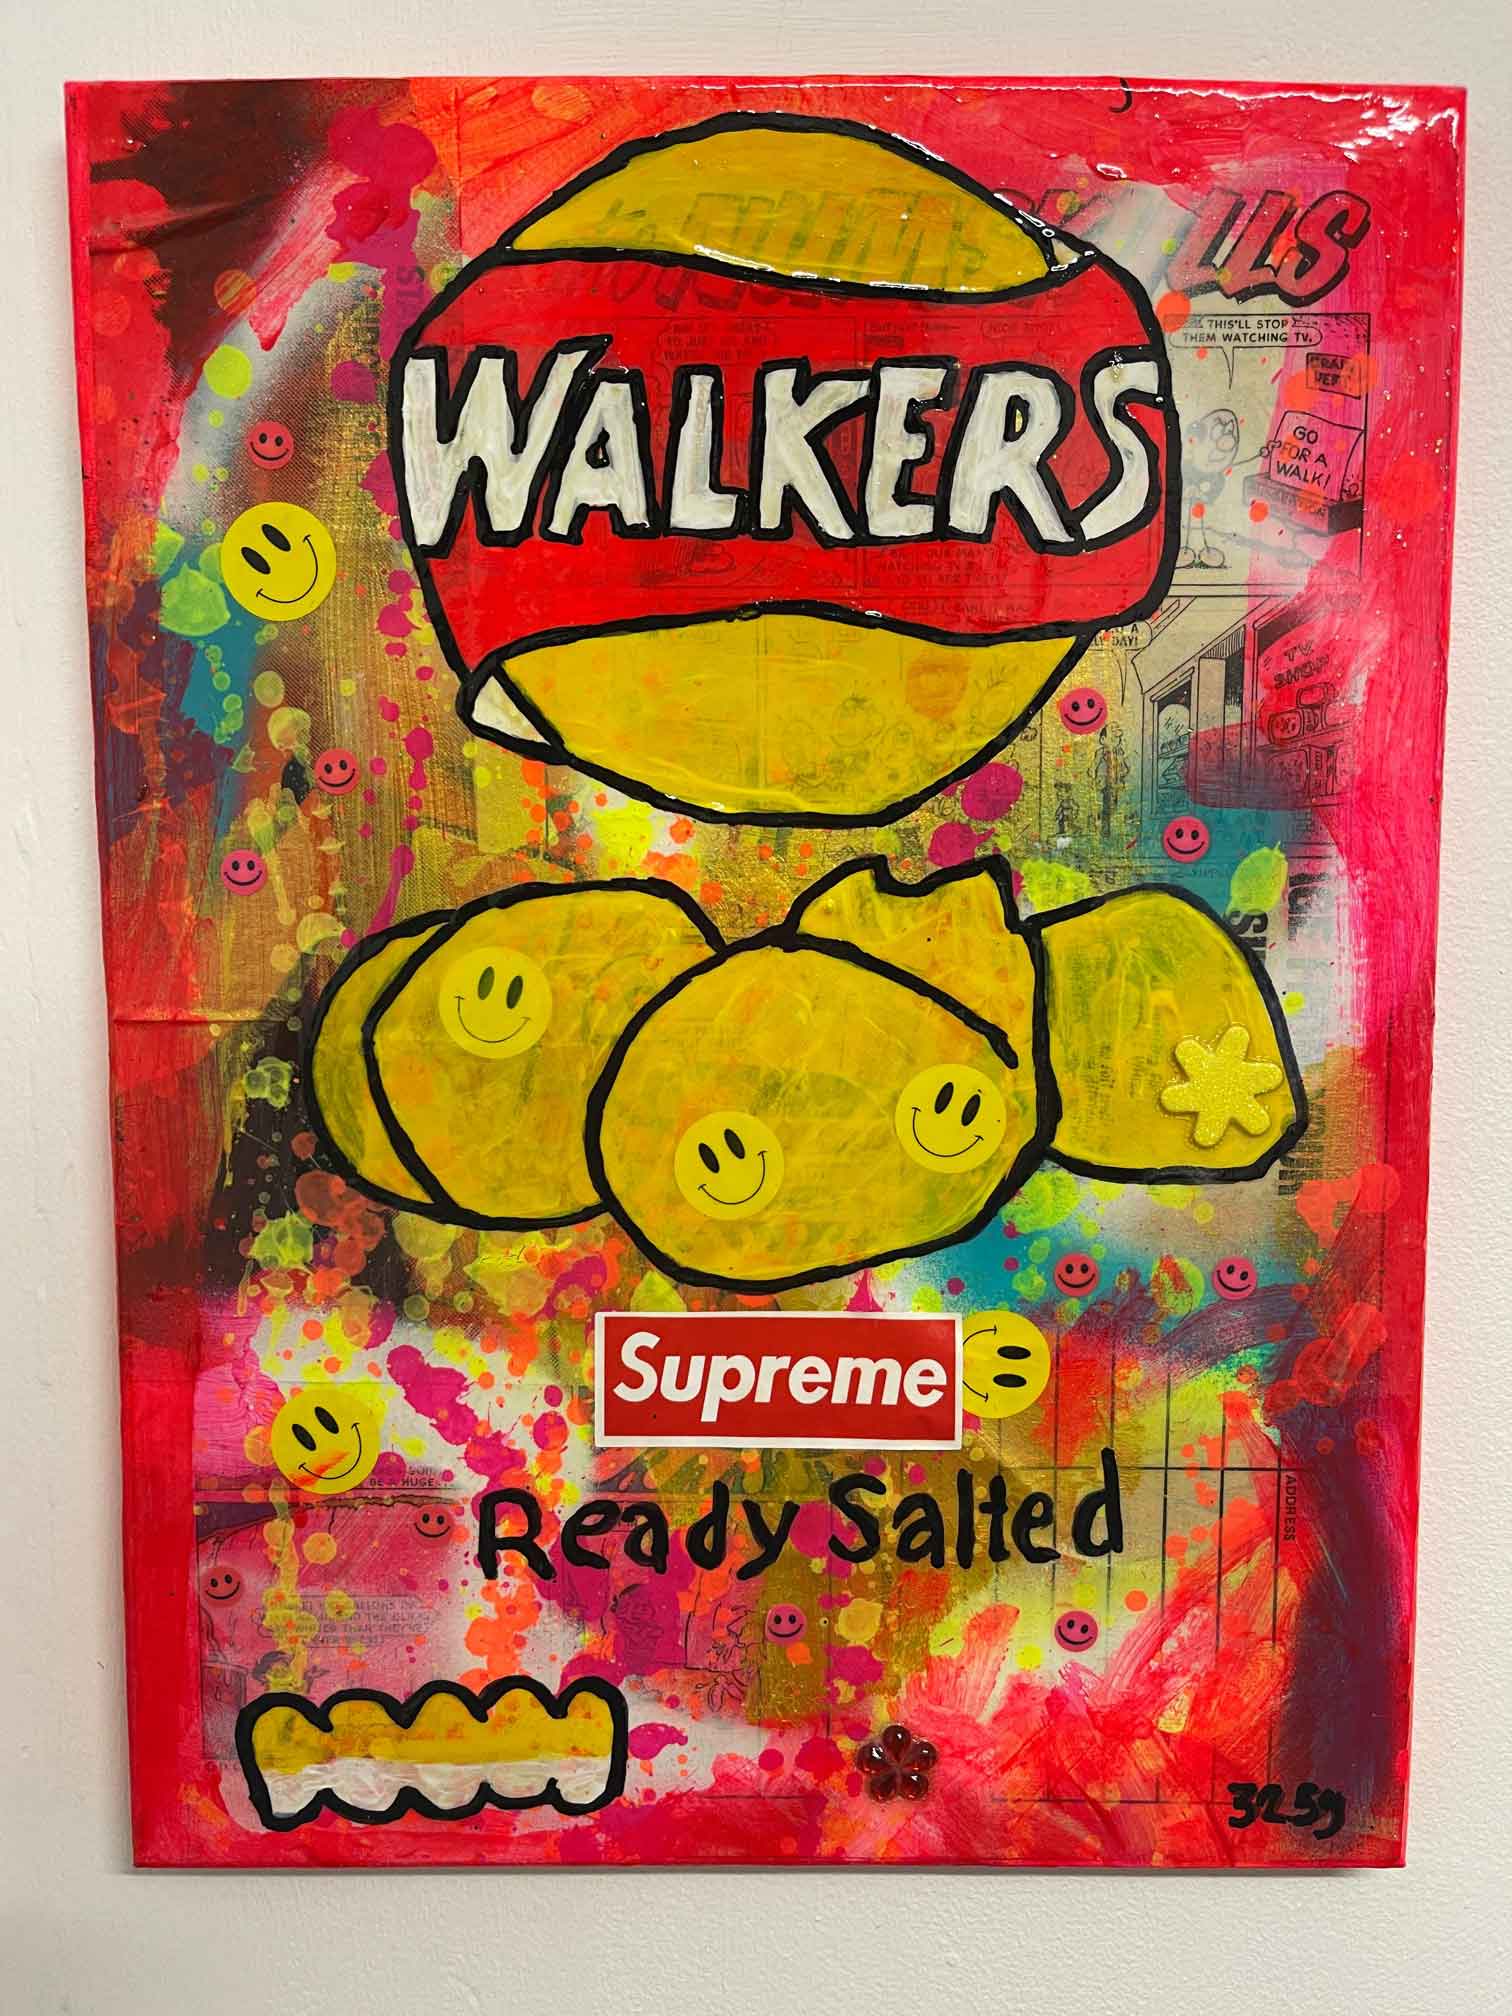 Ready Salted Crisps Painting by Barrie J Davies 2022, Mixed media on Canvas, 27cm x 35cm, Unframed and ready to hang.